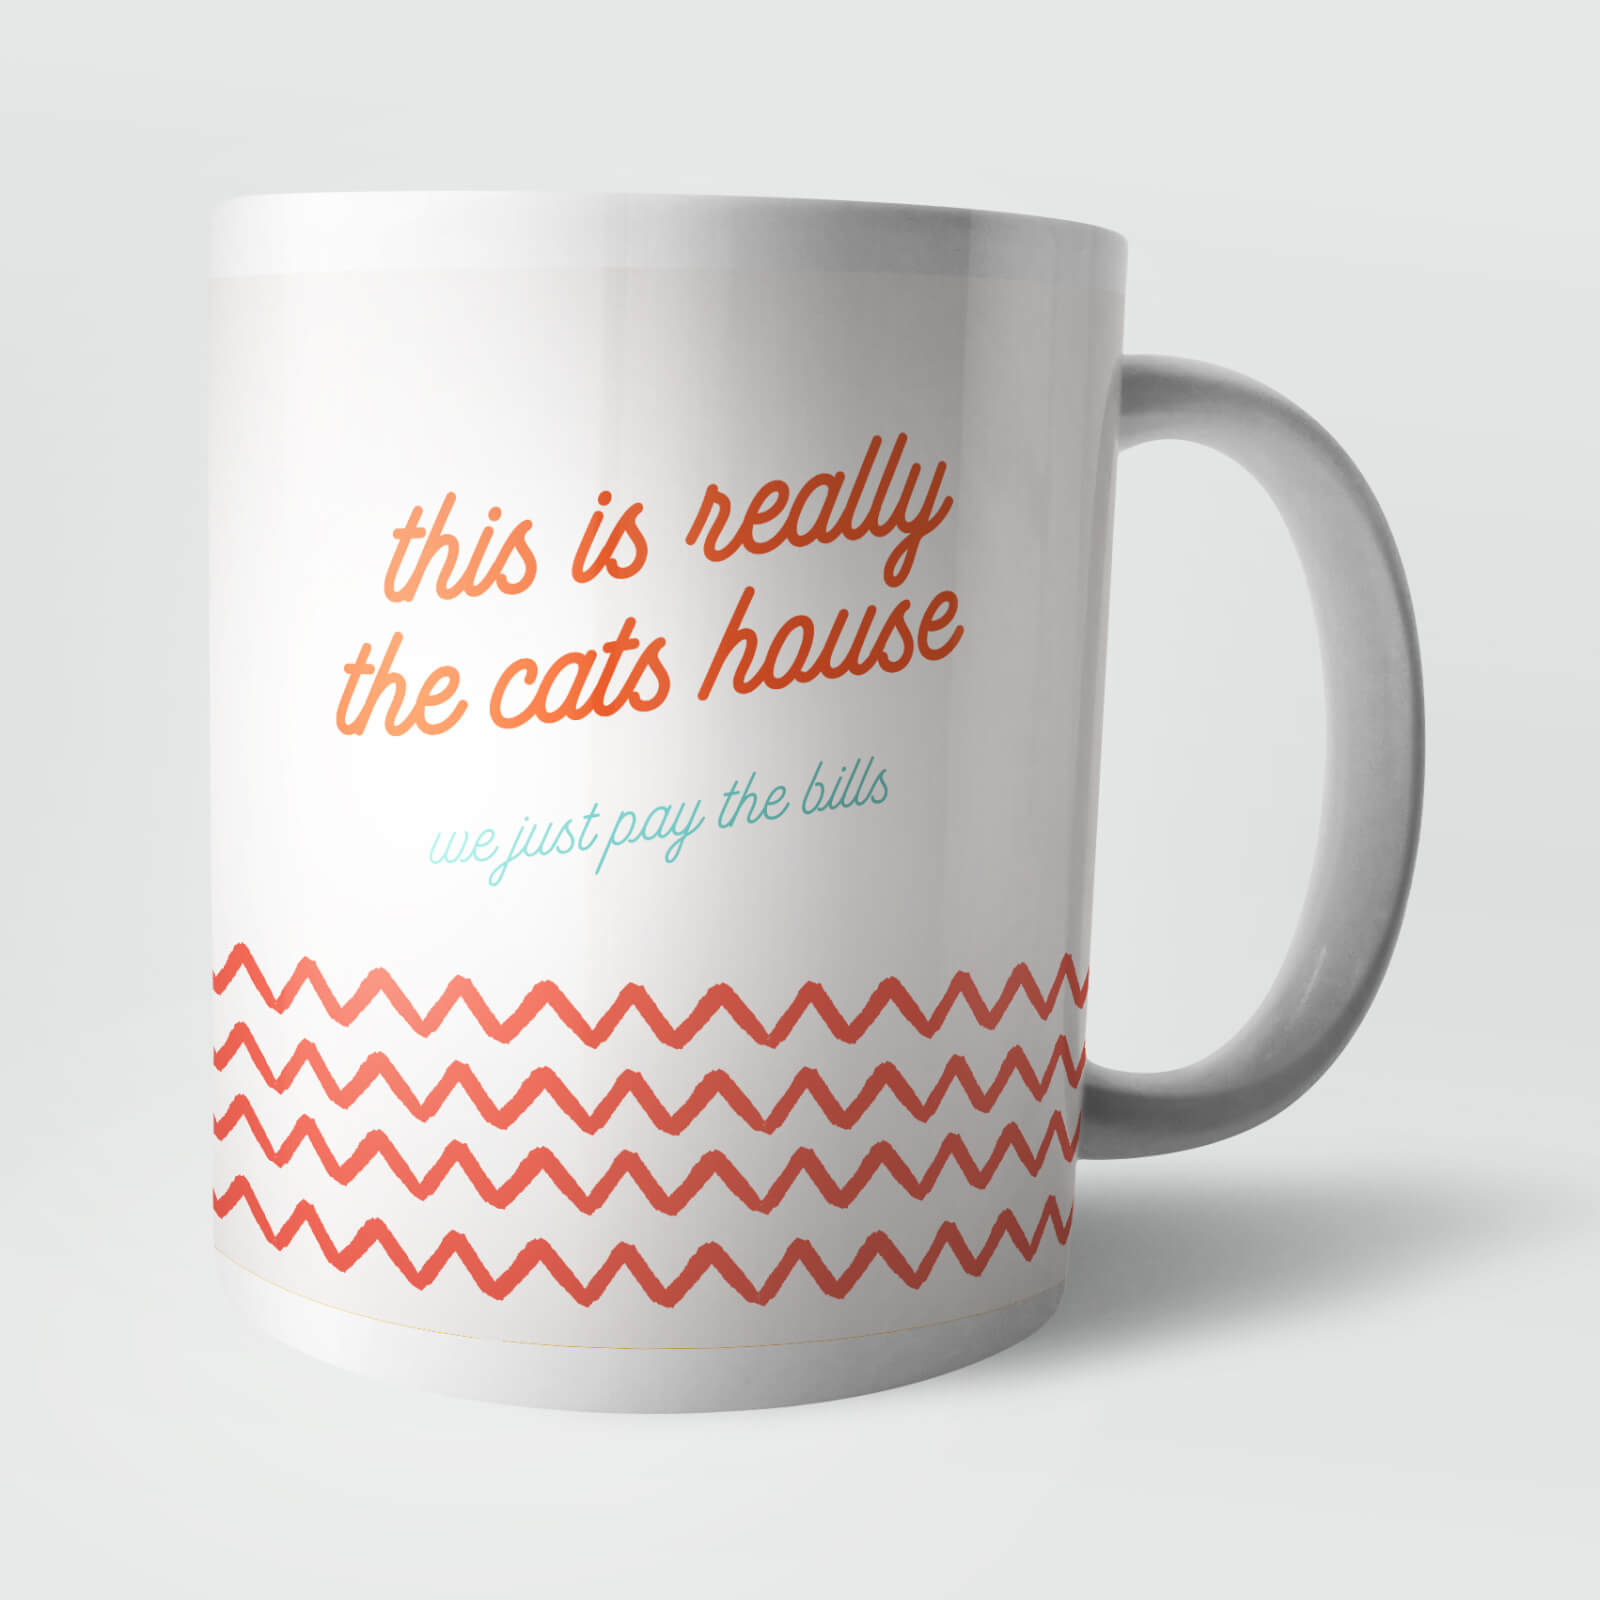 This Is Really The Cats House Mug